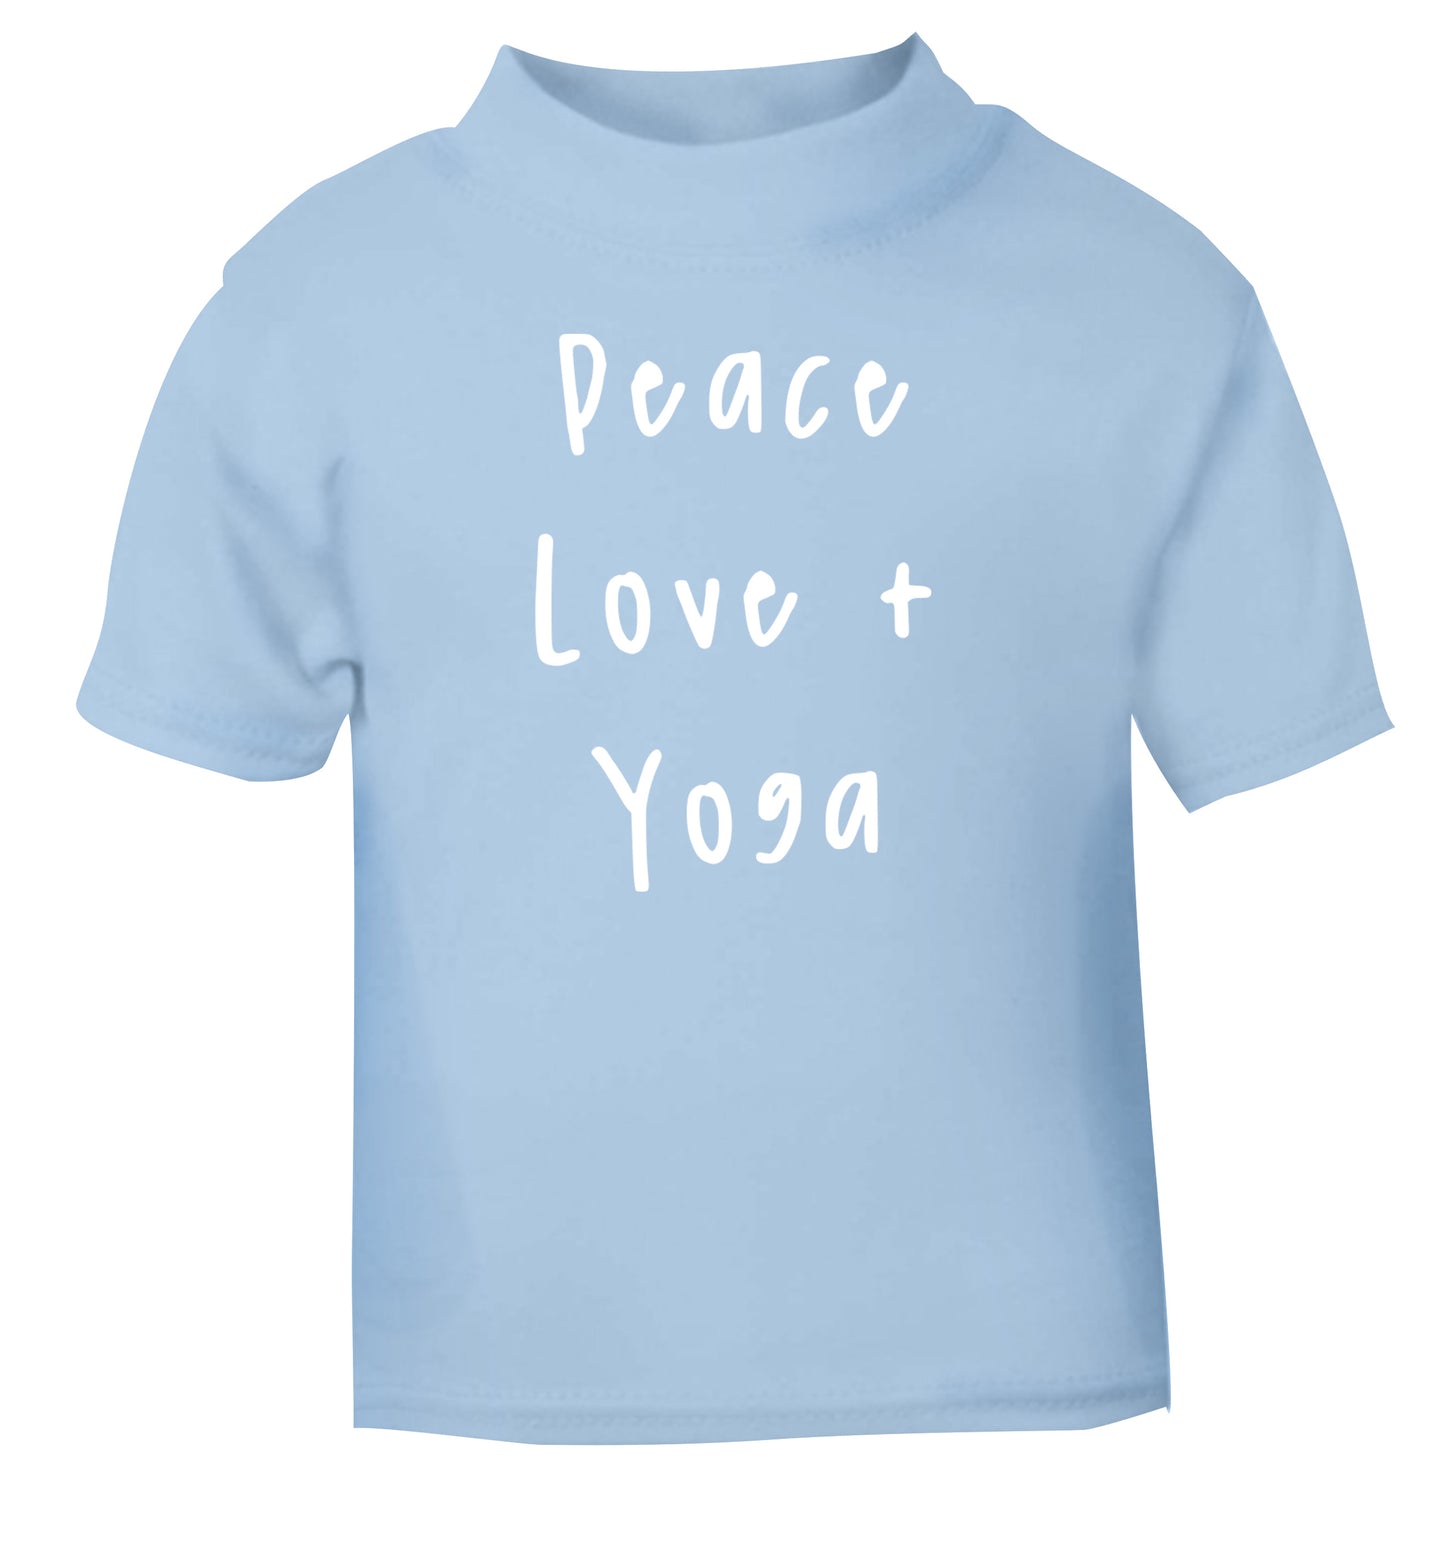 Peace love and yoga light blue Baby Toddler Tshirt 2 Years